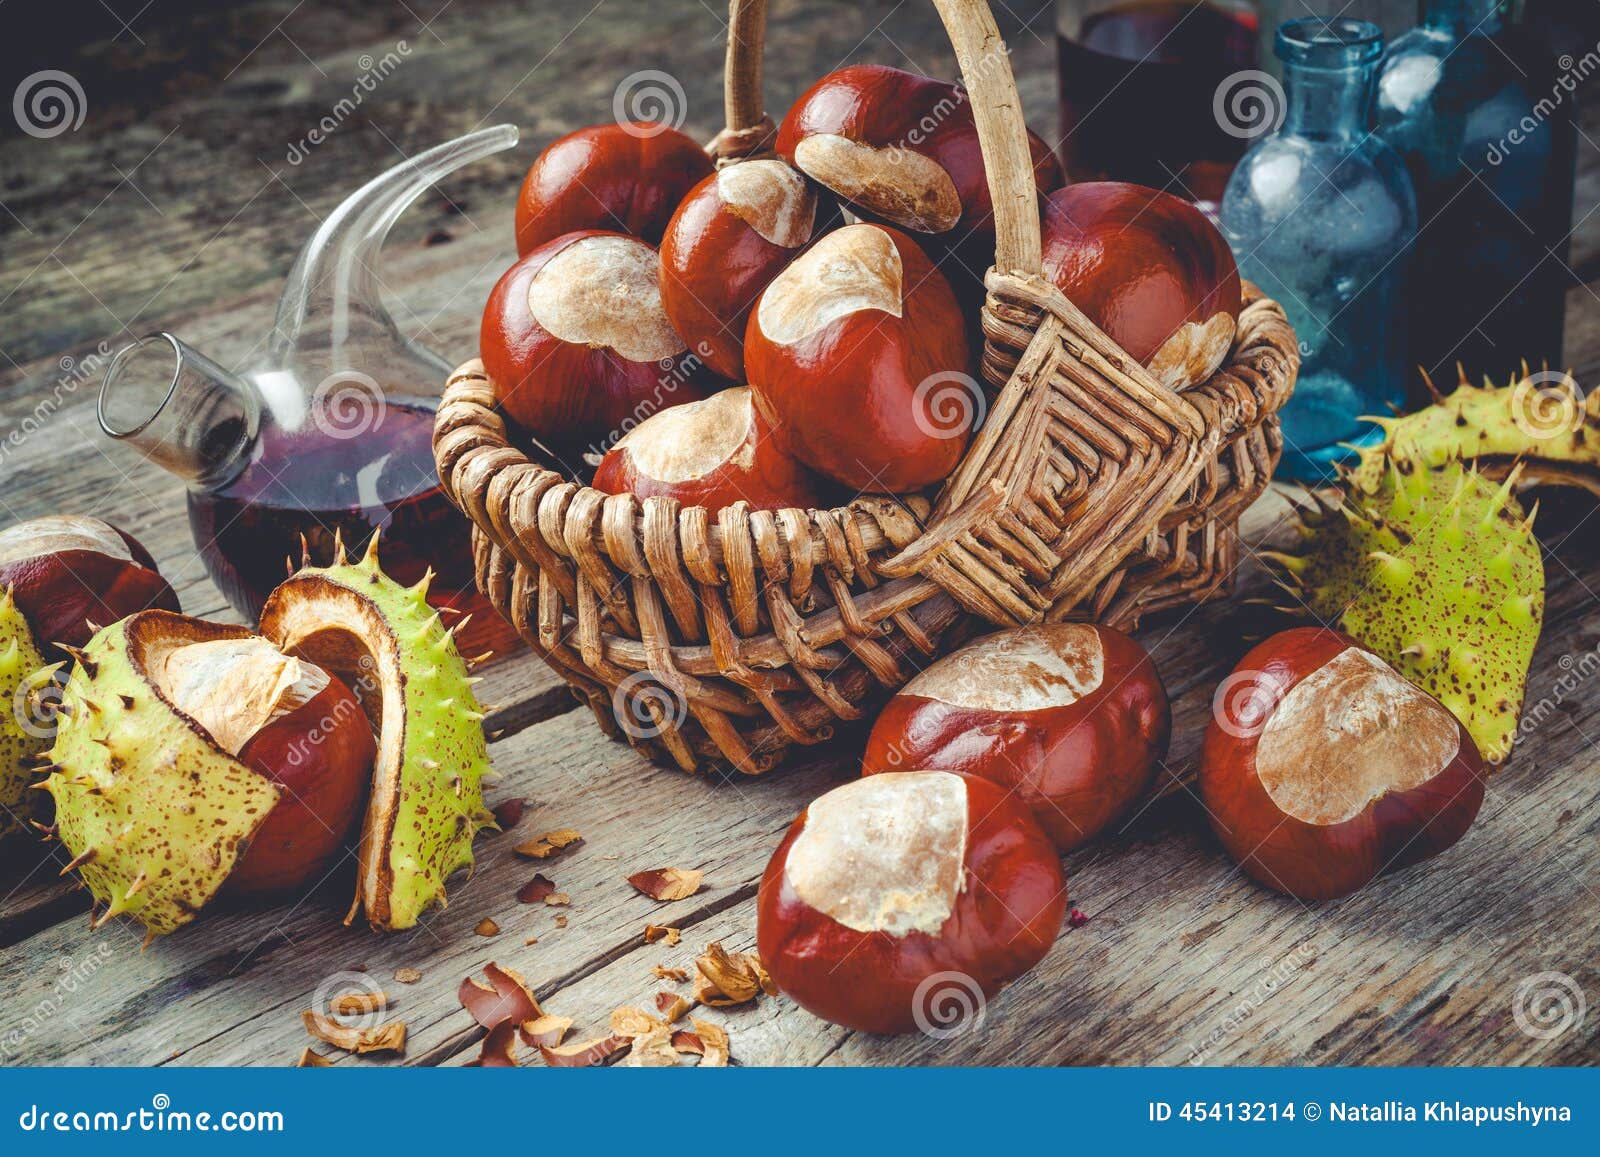 chestnuts in basket and vials with tincture